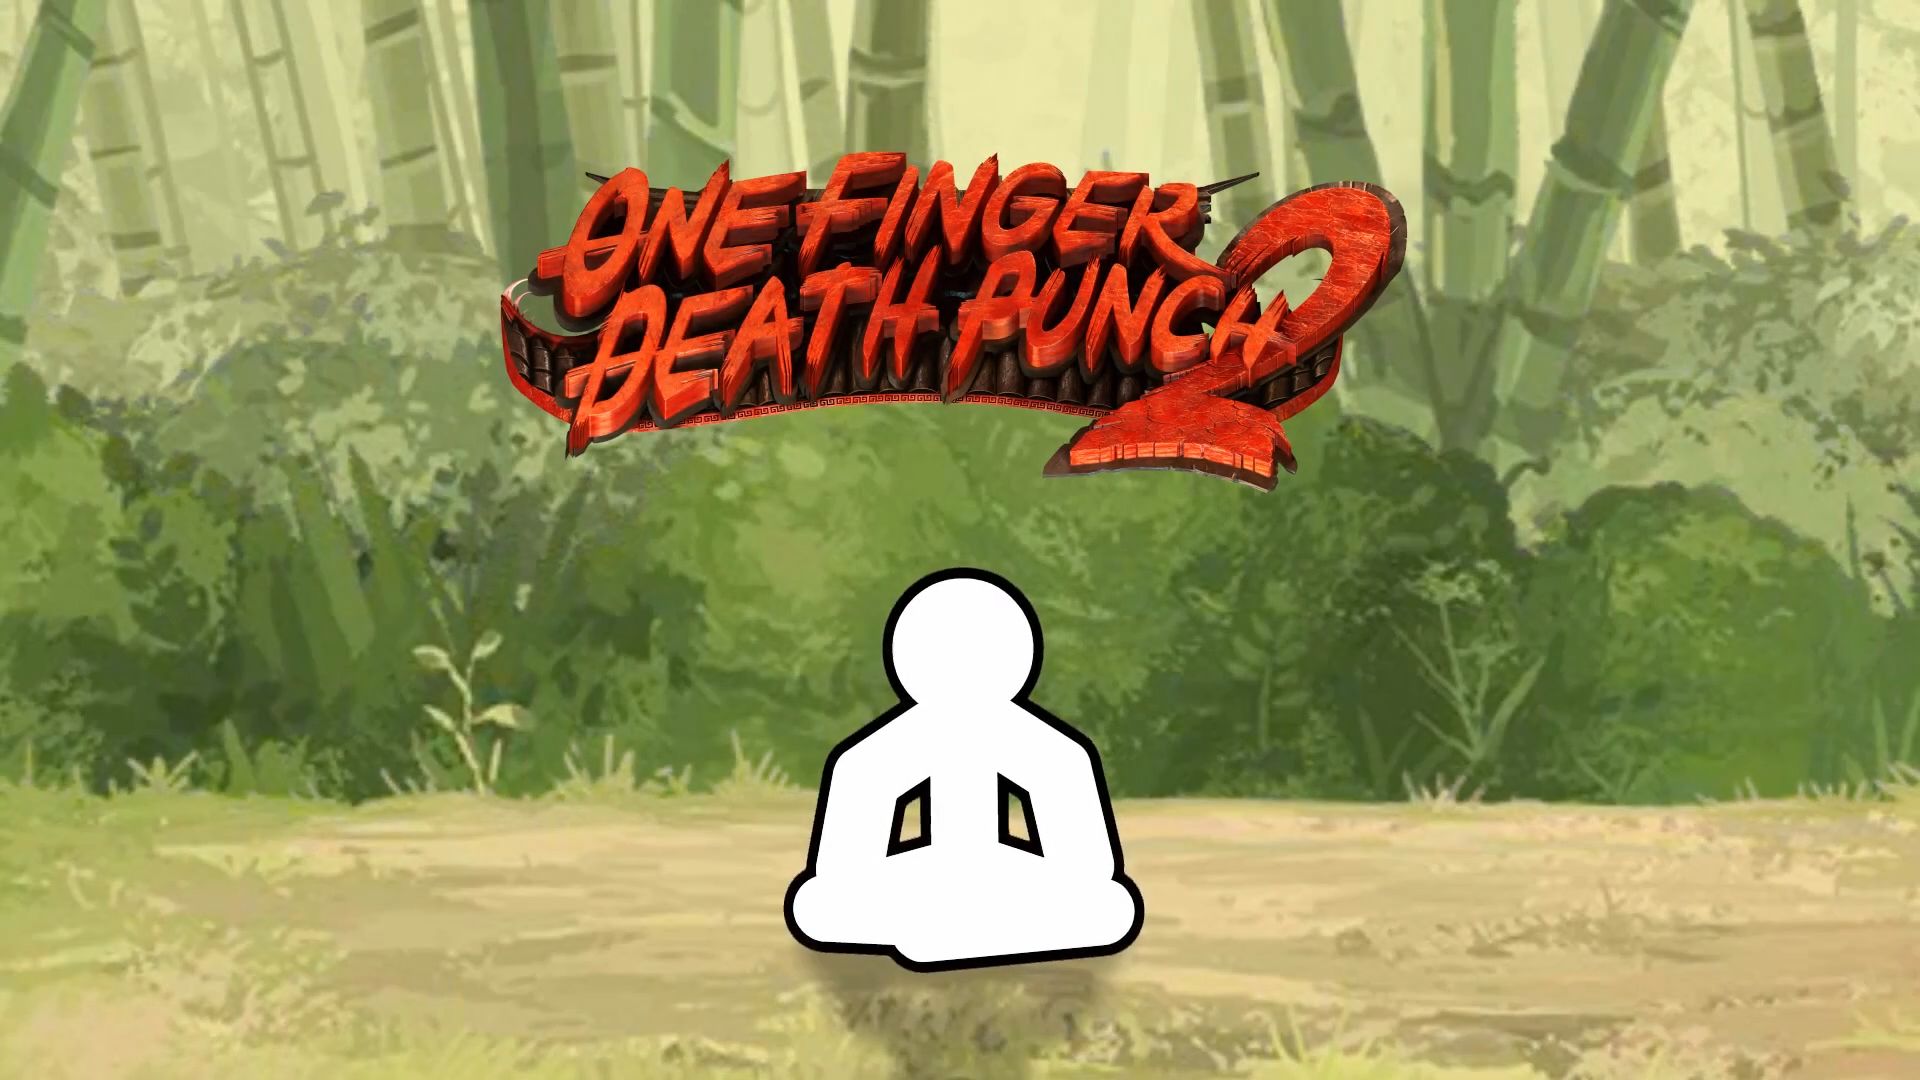 Full version of Android Beat ’em up game apk One Finger Death Punch 2 for tablet and phone.